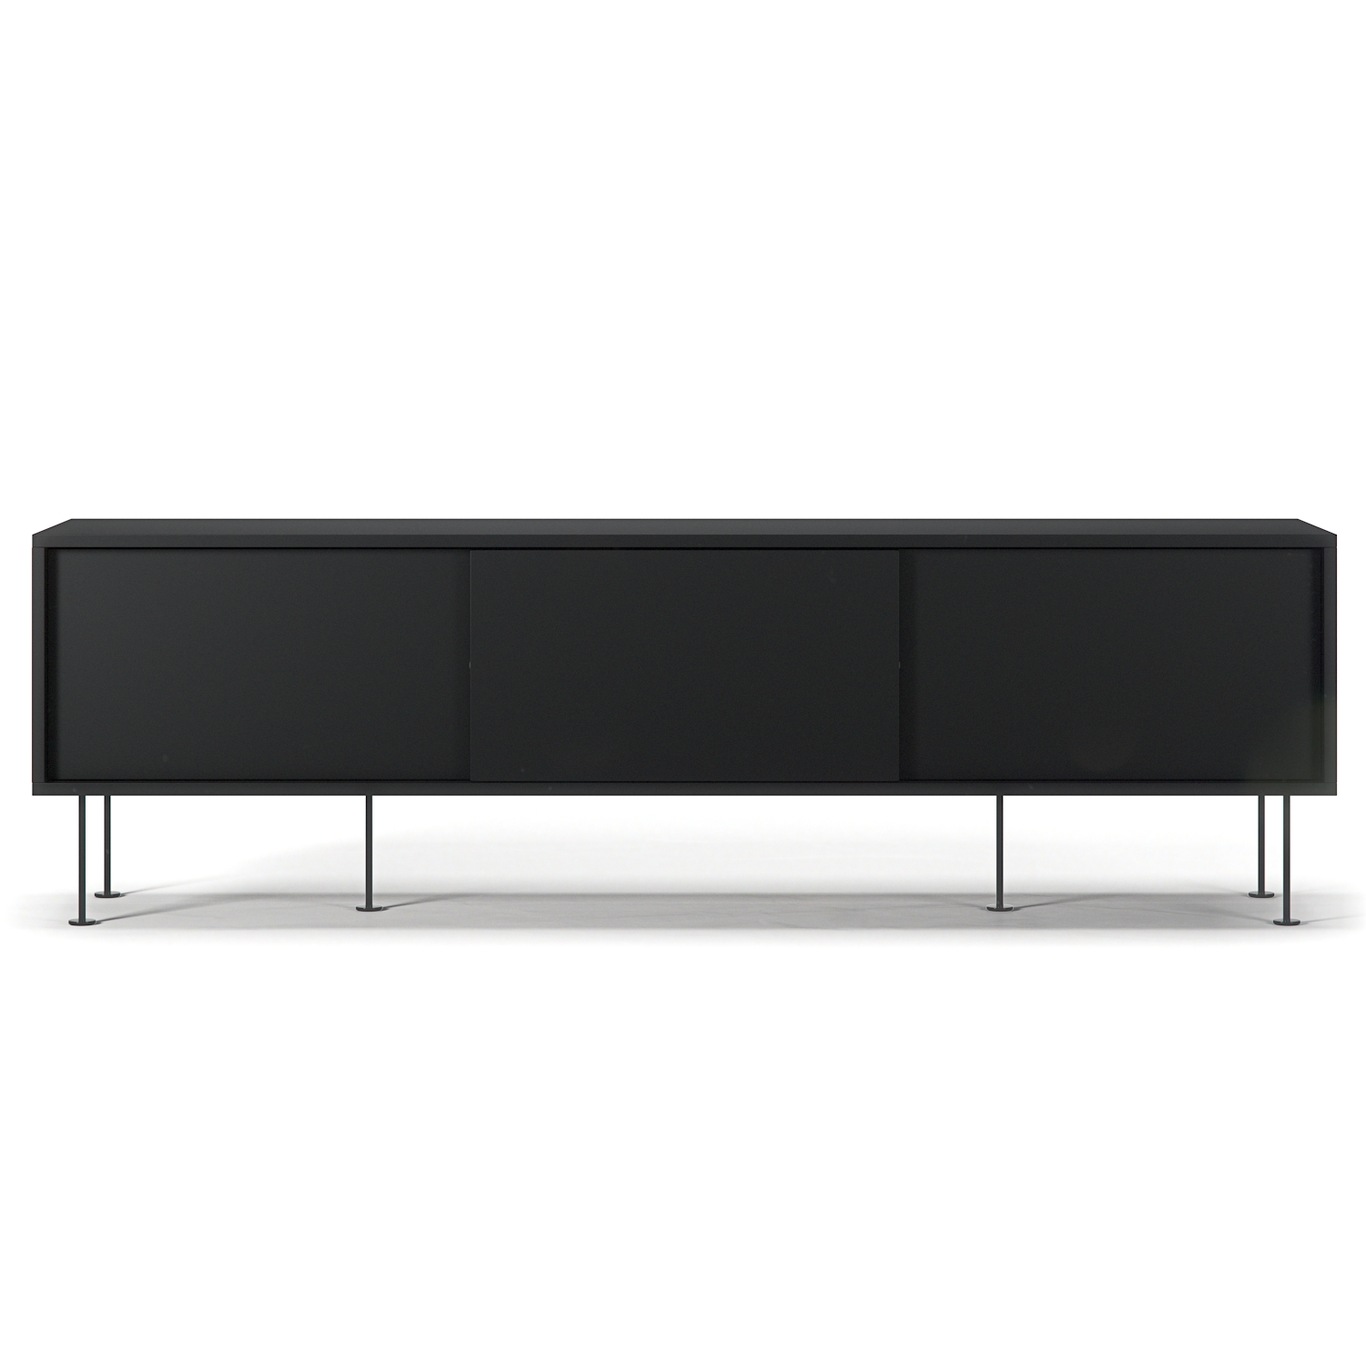 Vogue Media Bench With Legs 180 cm, Anthracite / Black